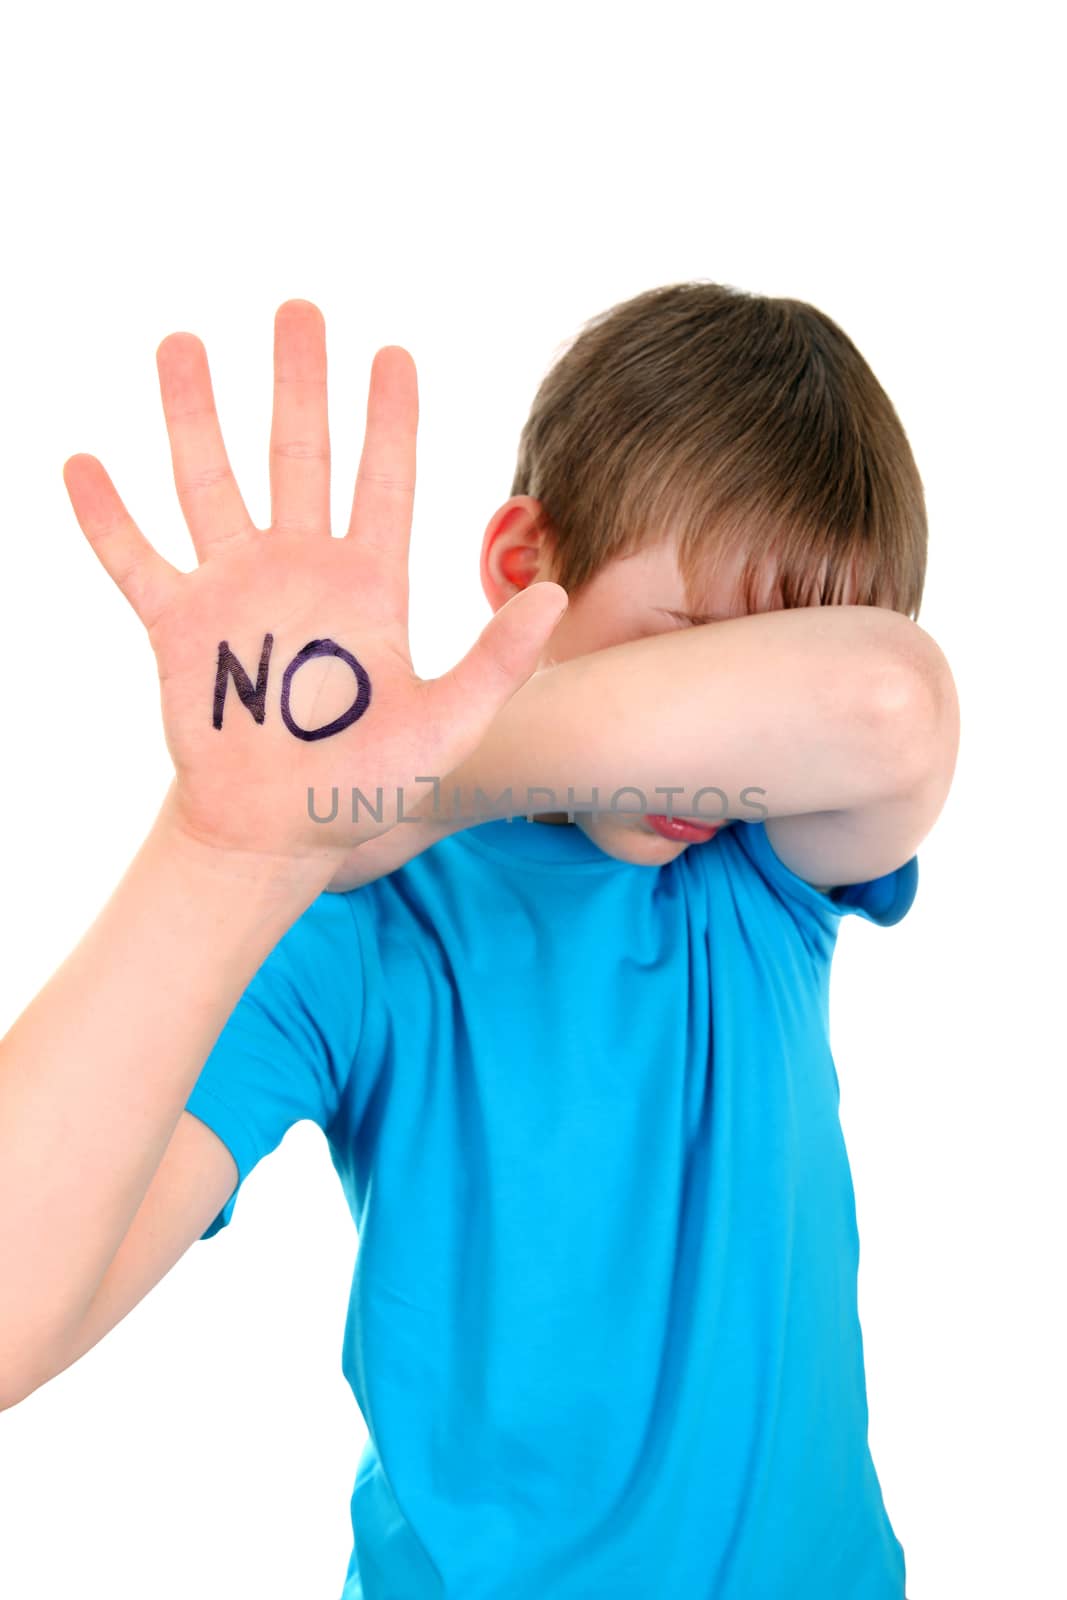 Sad Kid shows the palm gesture with an inscription NO. Focus on the Palm